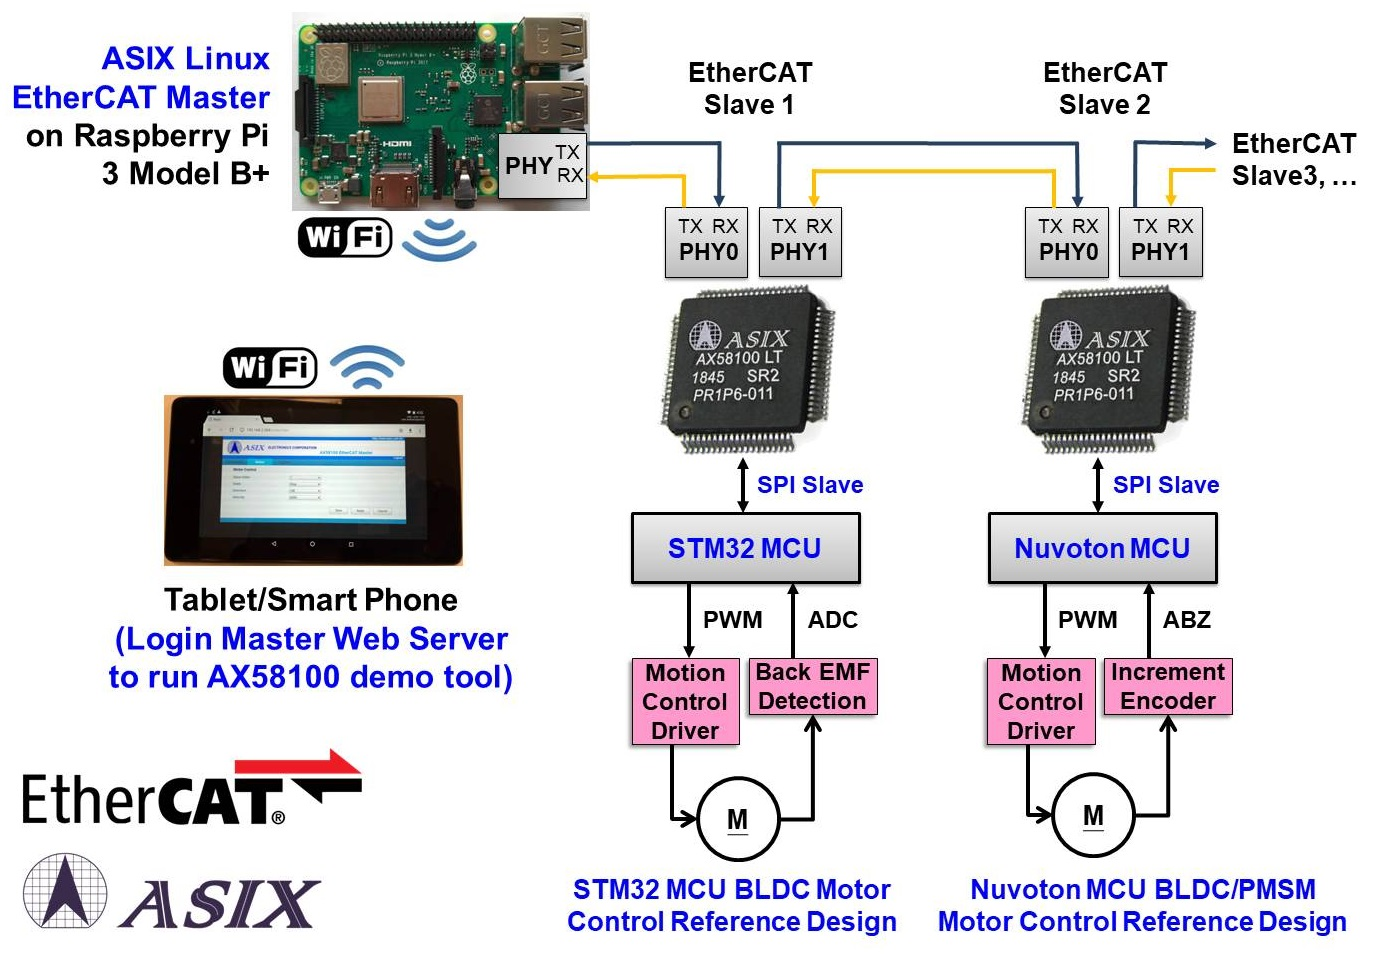 ASIX complete industrial Ethernet EtherCAT solutions